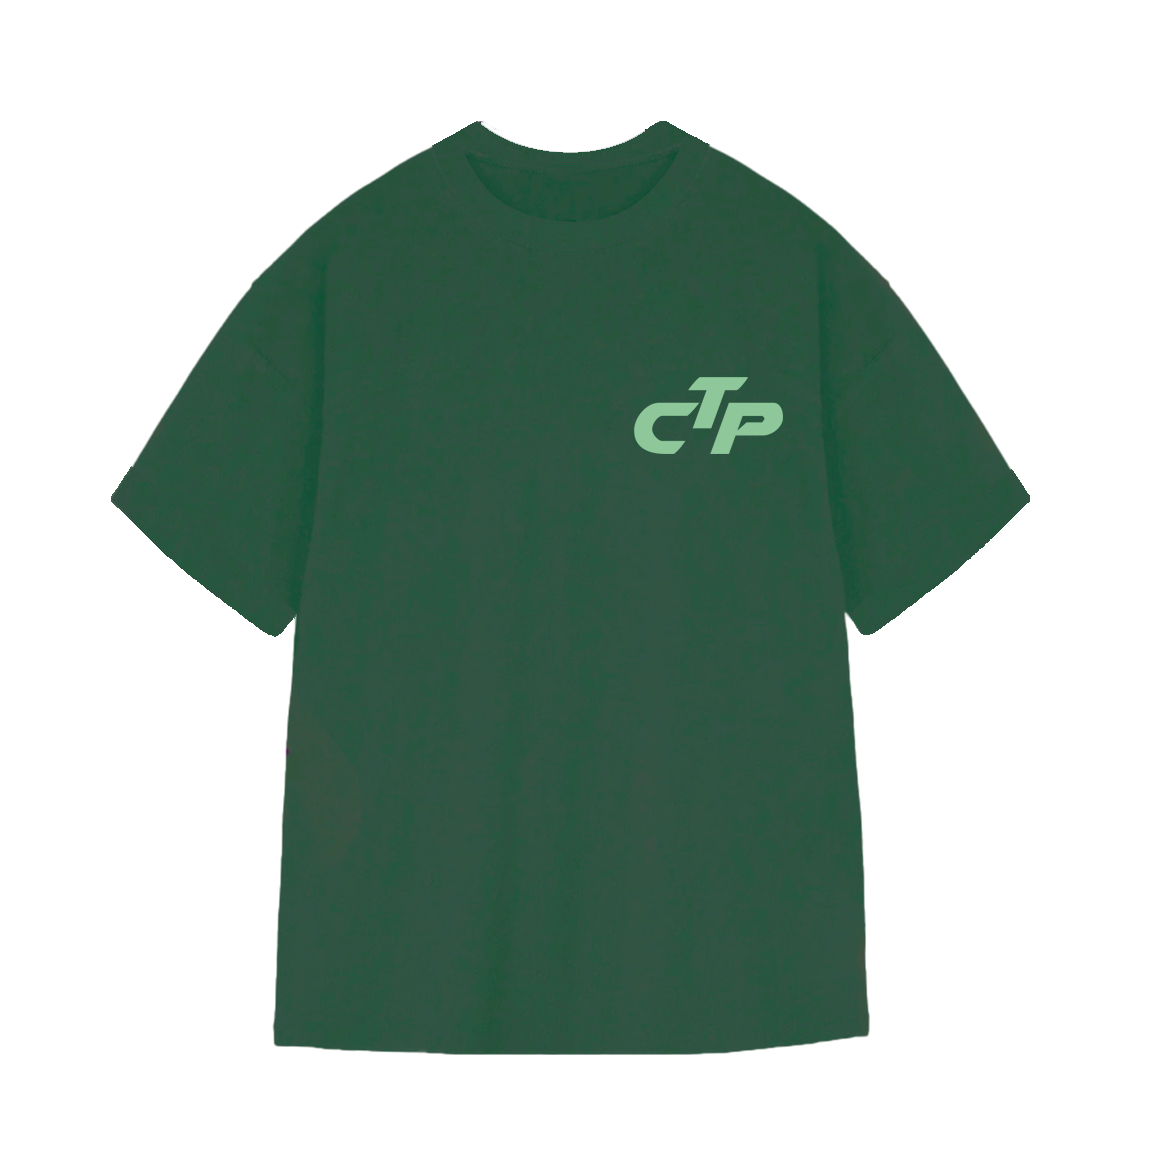 The CTP T-Shirt Green